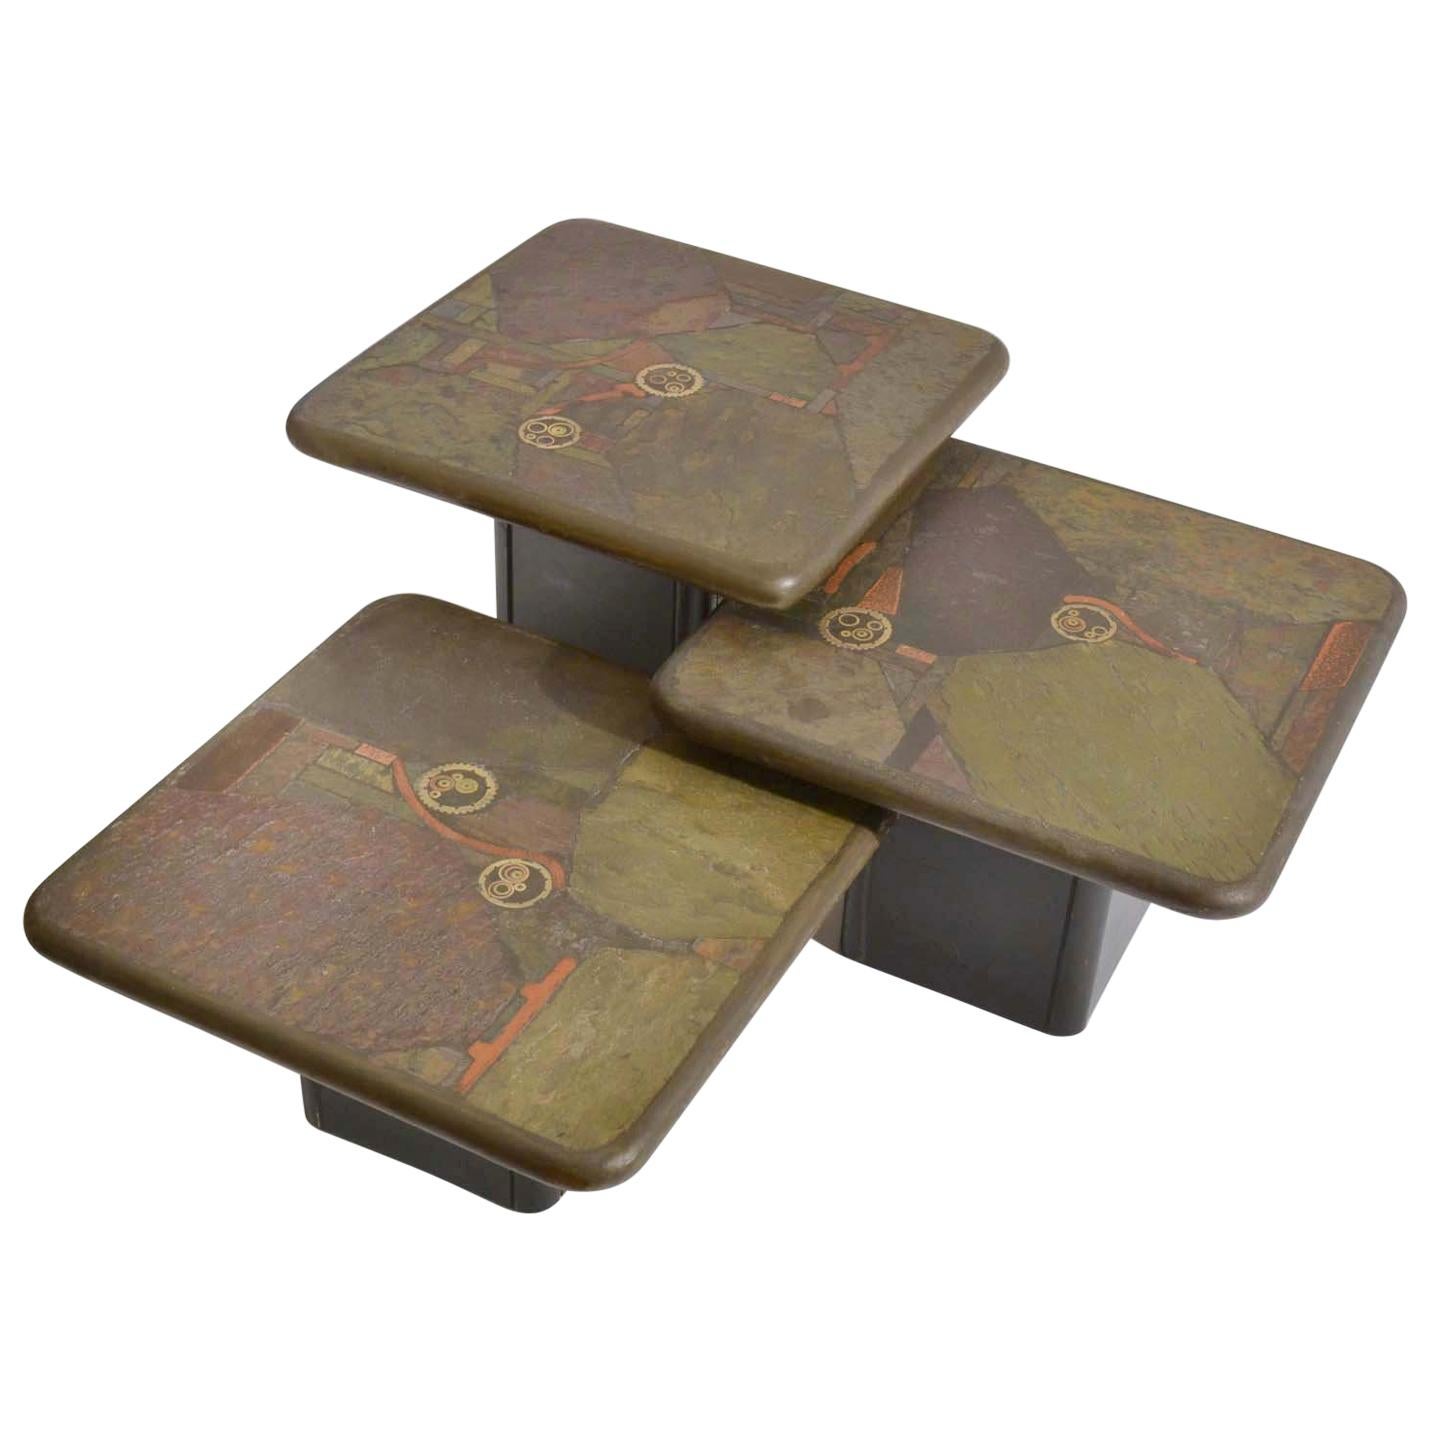 Set of three nesting natural stone mosaic side tables on alternating heights. The tables are inlaid with unpolished textural stone in earth colors and pieces of brass and copper. 
These extraordinary sculptural tables are square 60 x 60 cm tables